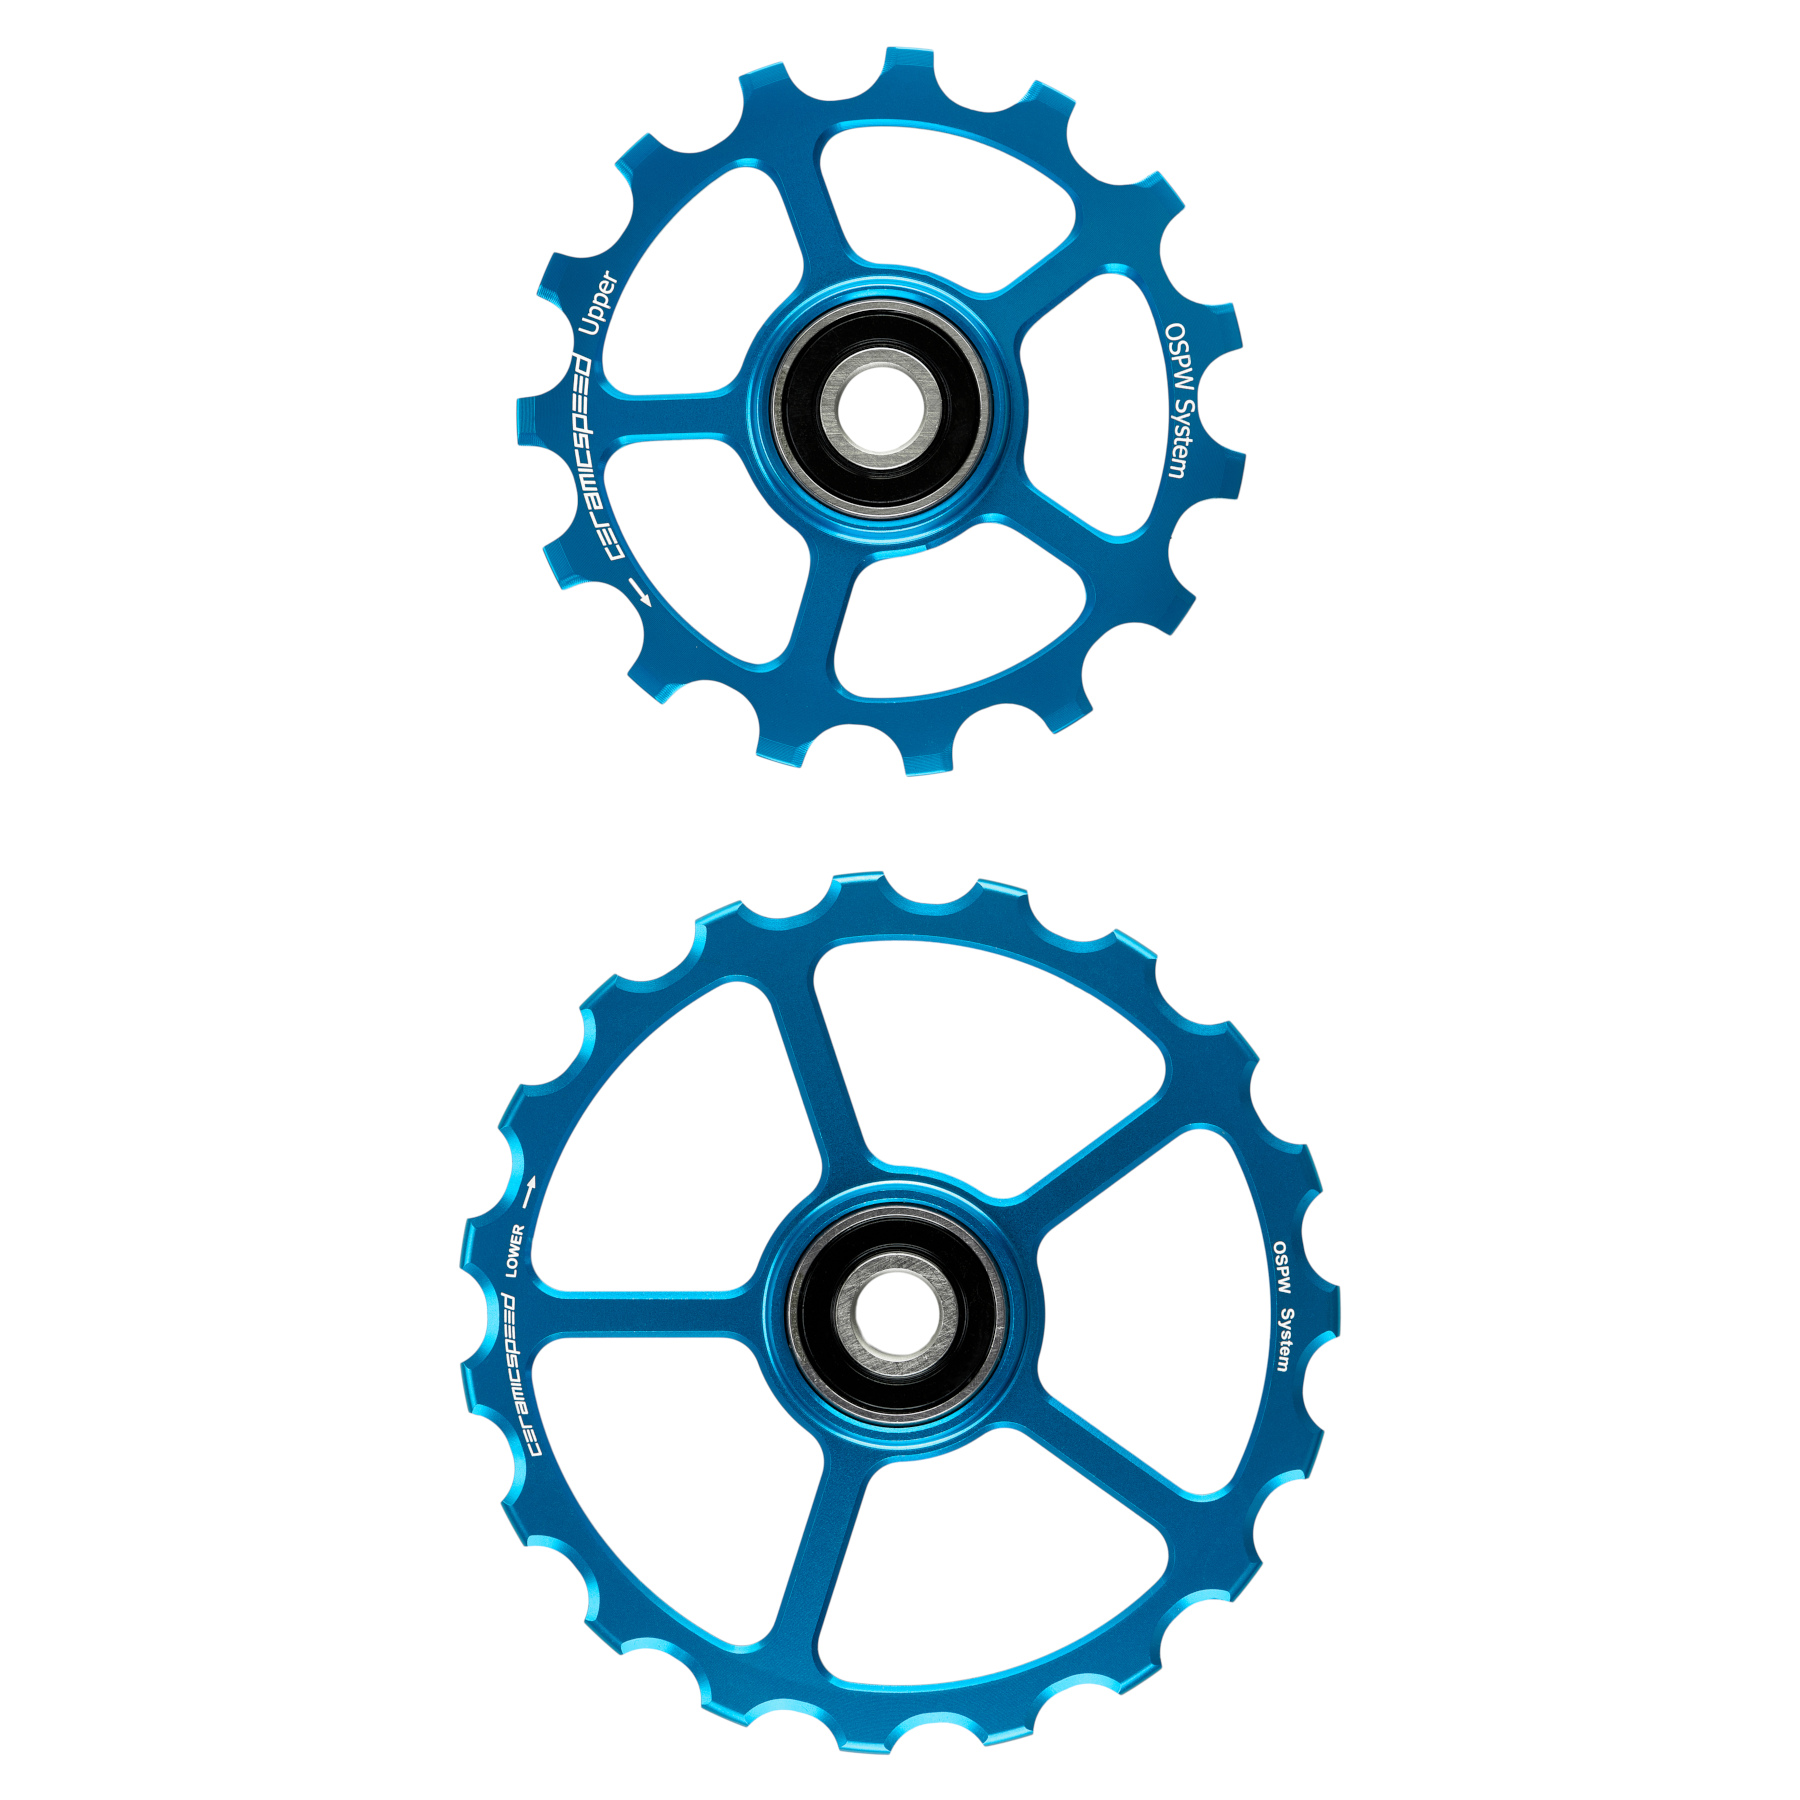 Picture of CeramicSpeed Replacement Derailleur Pulleys - OSPW | 15/19 Teeth - blue